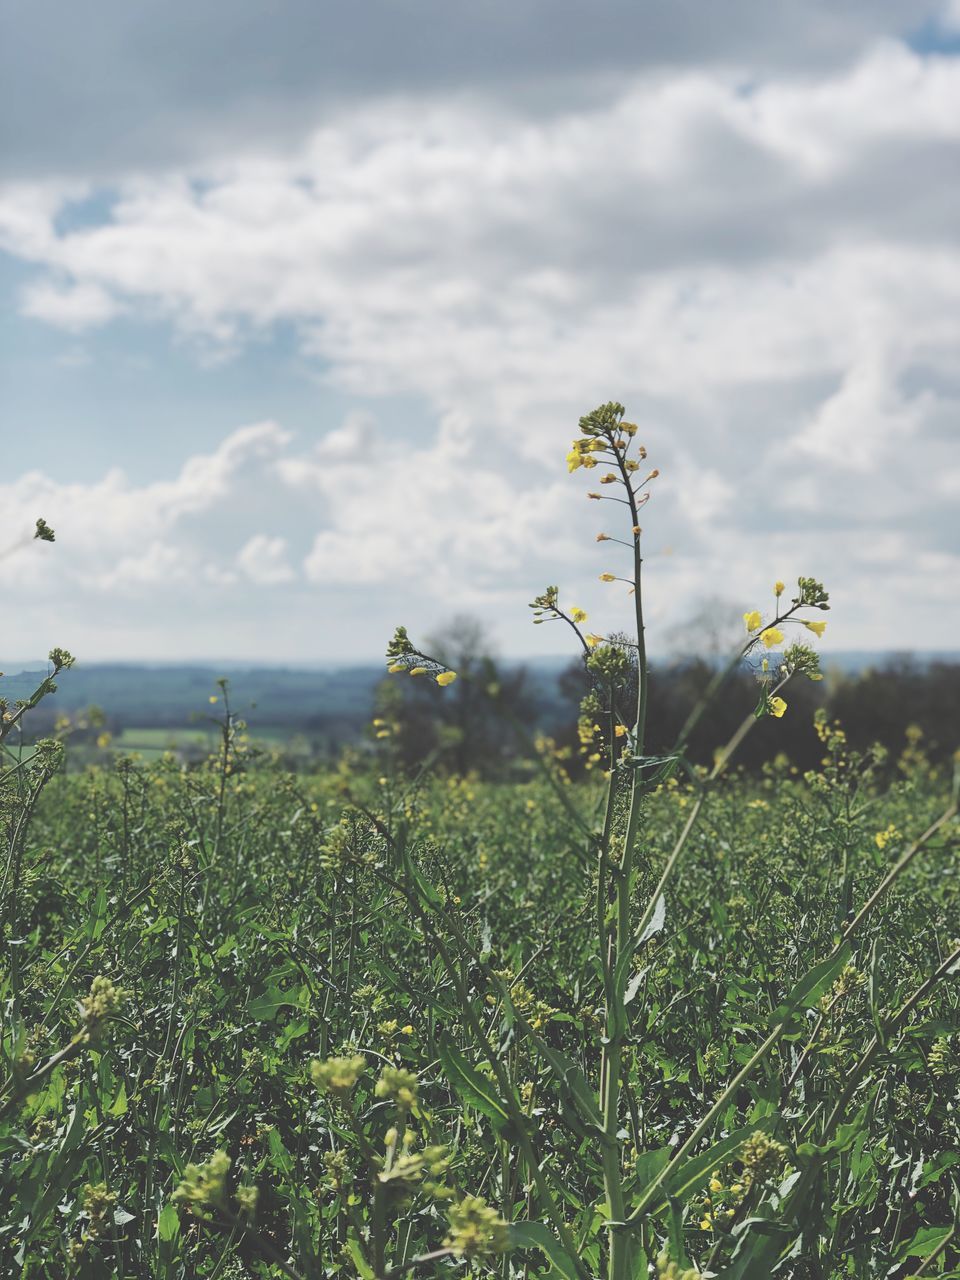 growth, plant, land, green color, cloud - sky, beauty in nature, nature, field, flower, tranquility, sky, fragility, vulnerability, day, flowering plant, no people, freshness, environment, tranquil scene, landscape, outdoors